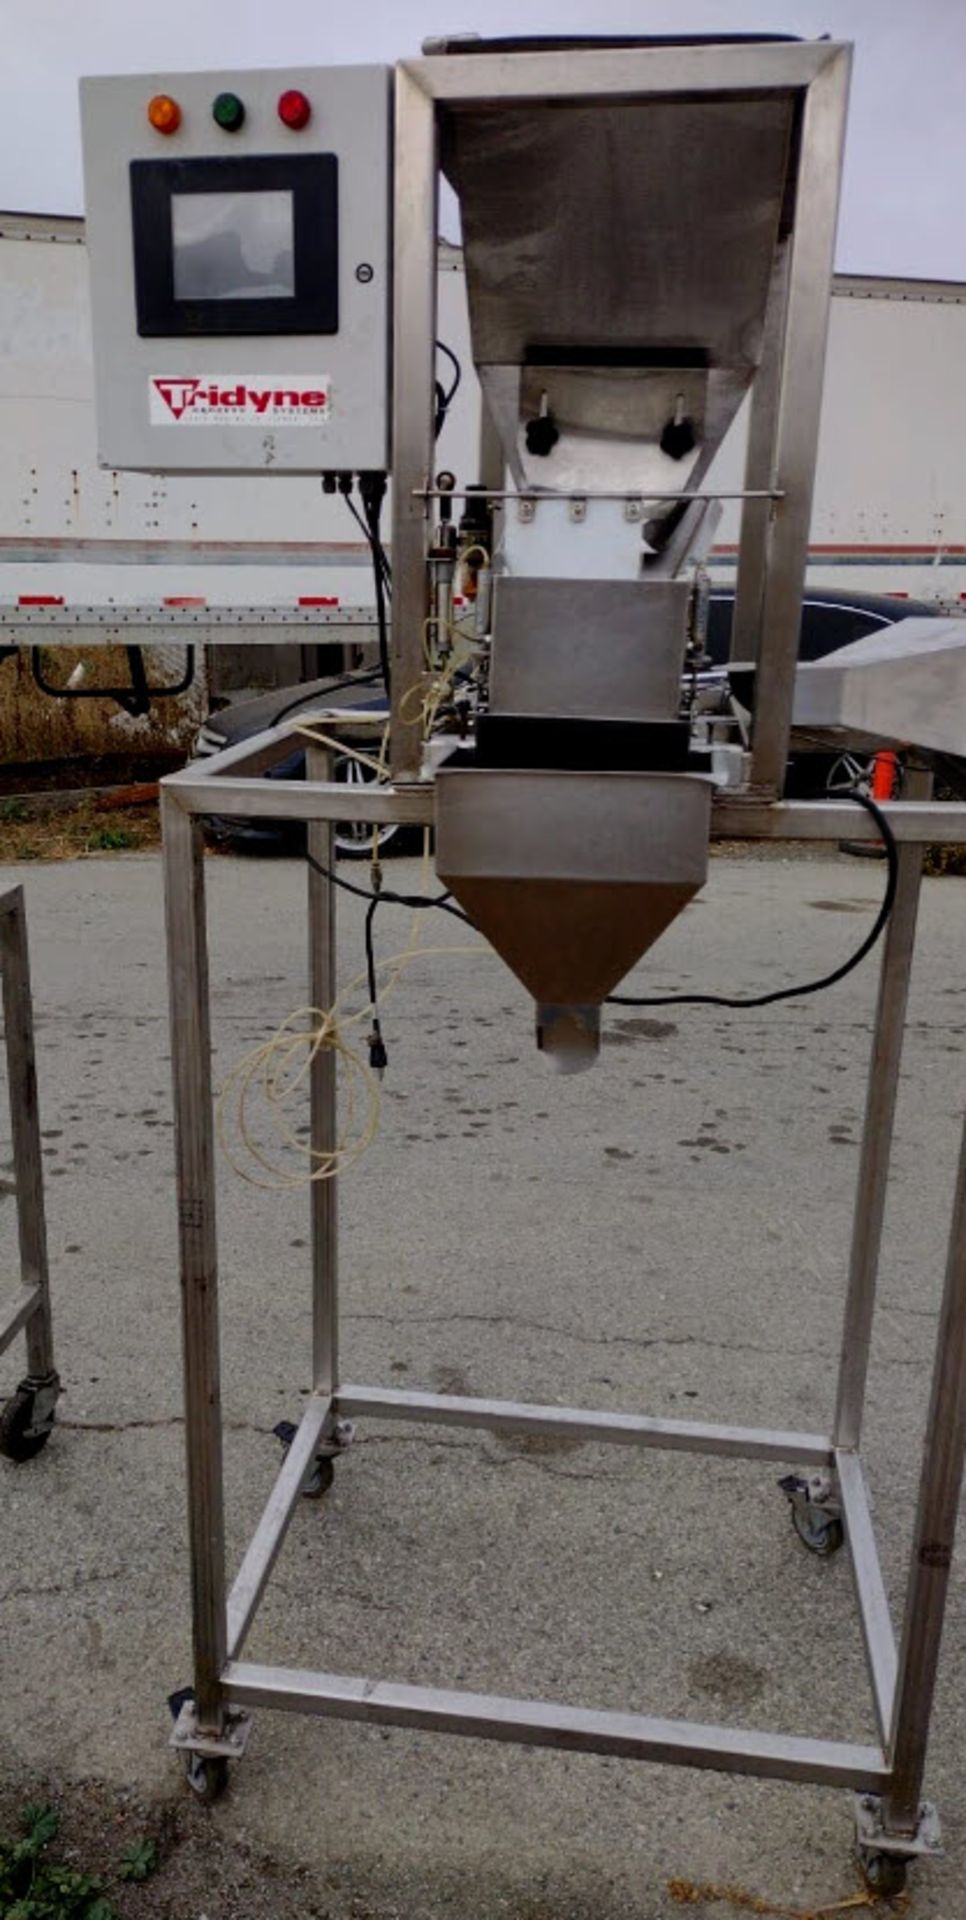 (Located in Hollister, CA) Tridyne Vibratory Feeder System Model F-100 Style, Rigging Fee: $100